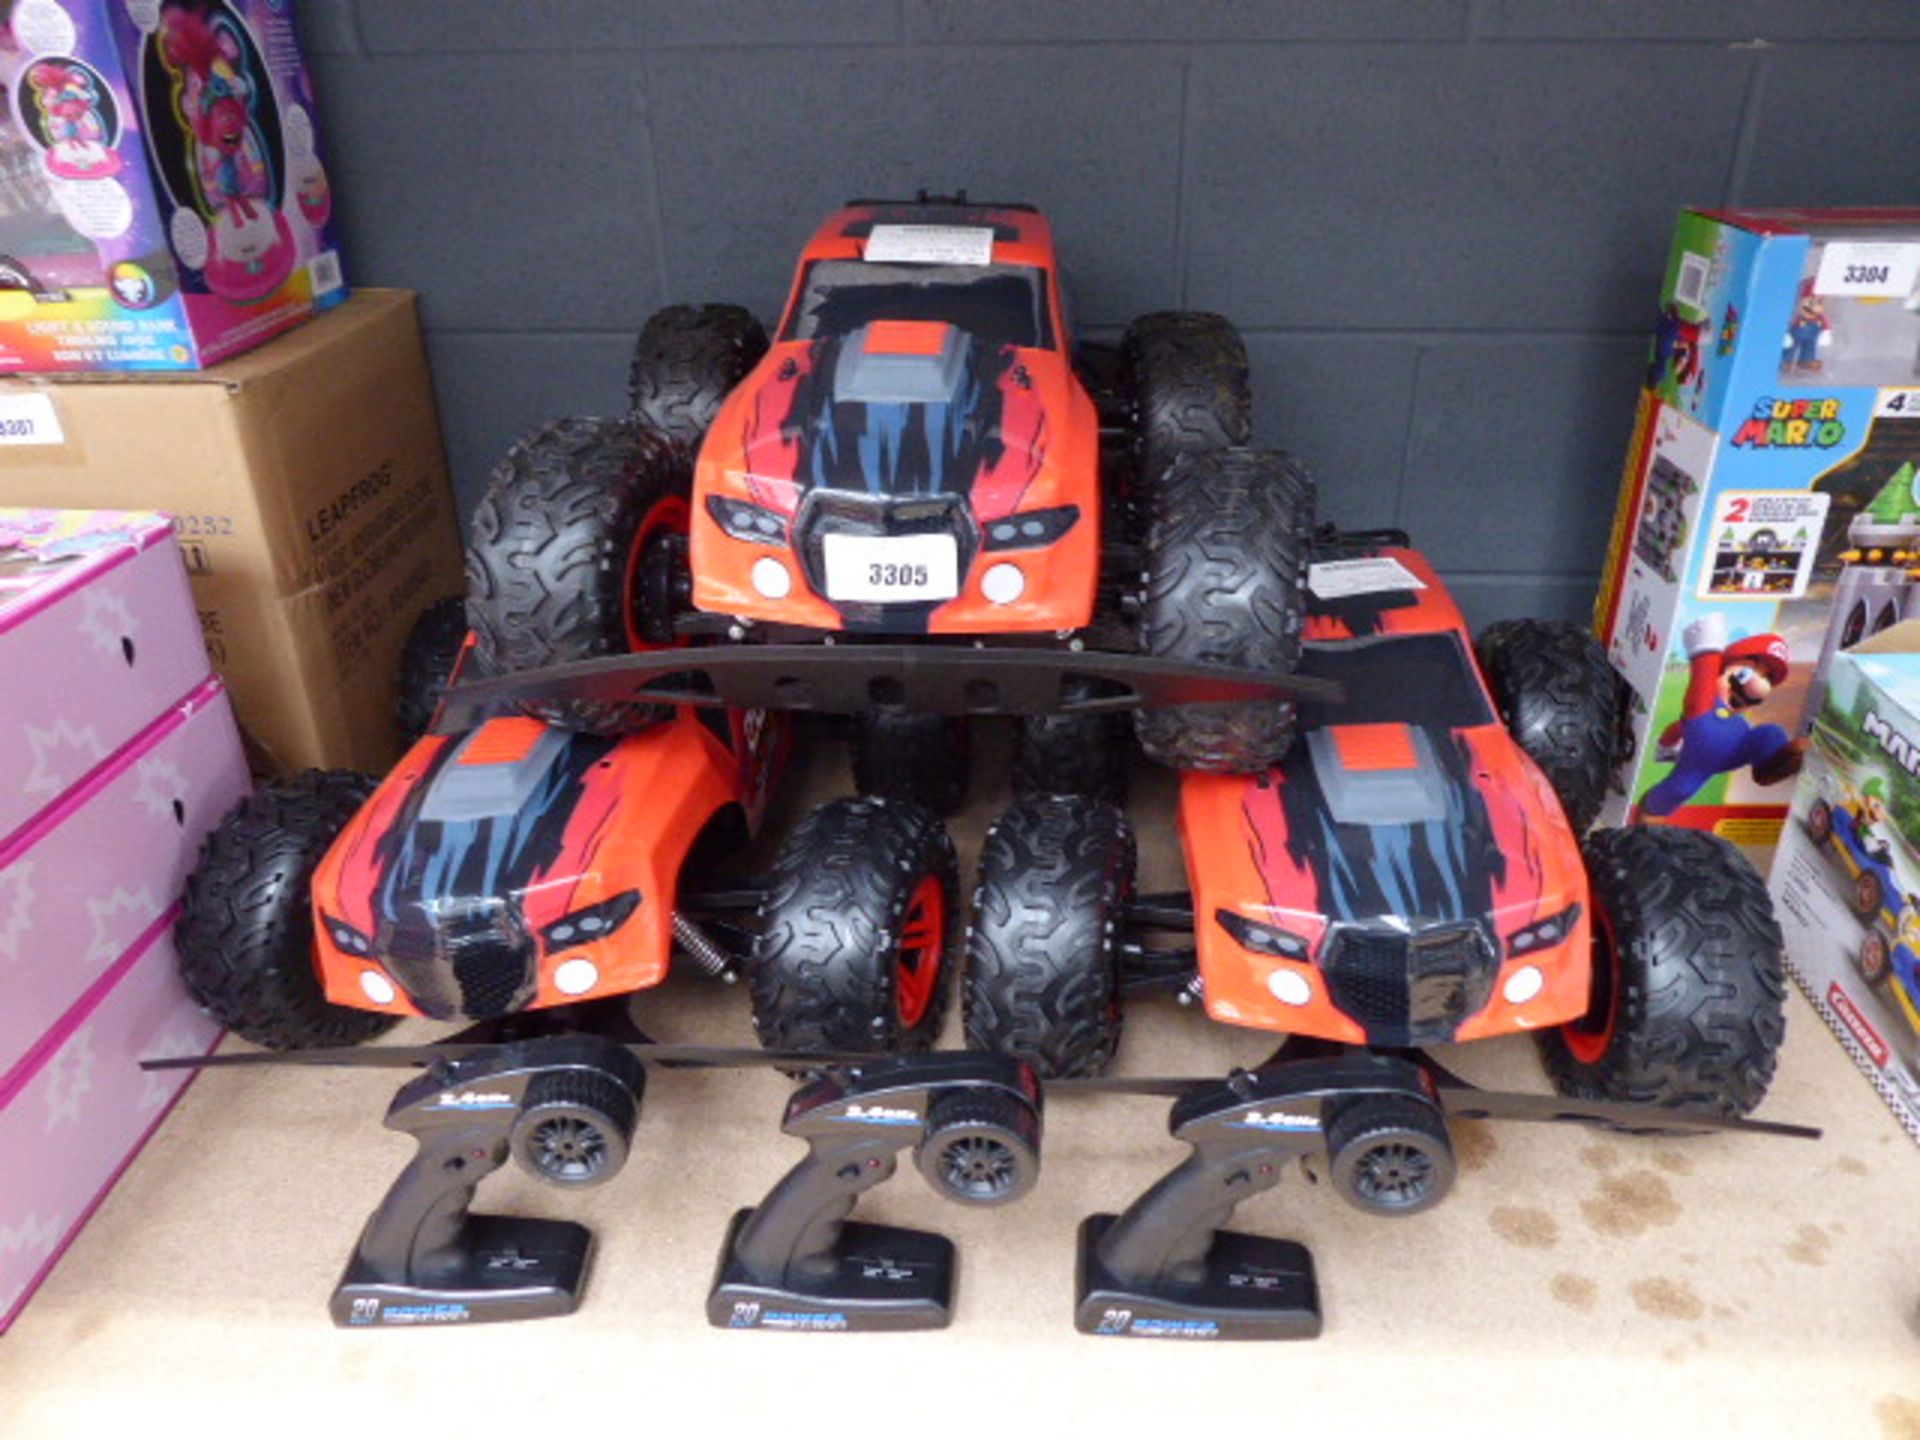 3 remote control speed vehicles with 3 remotes (no chargers)